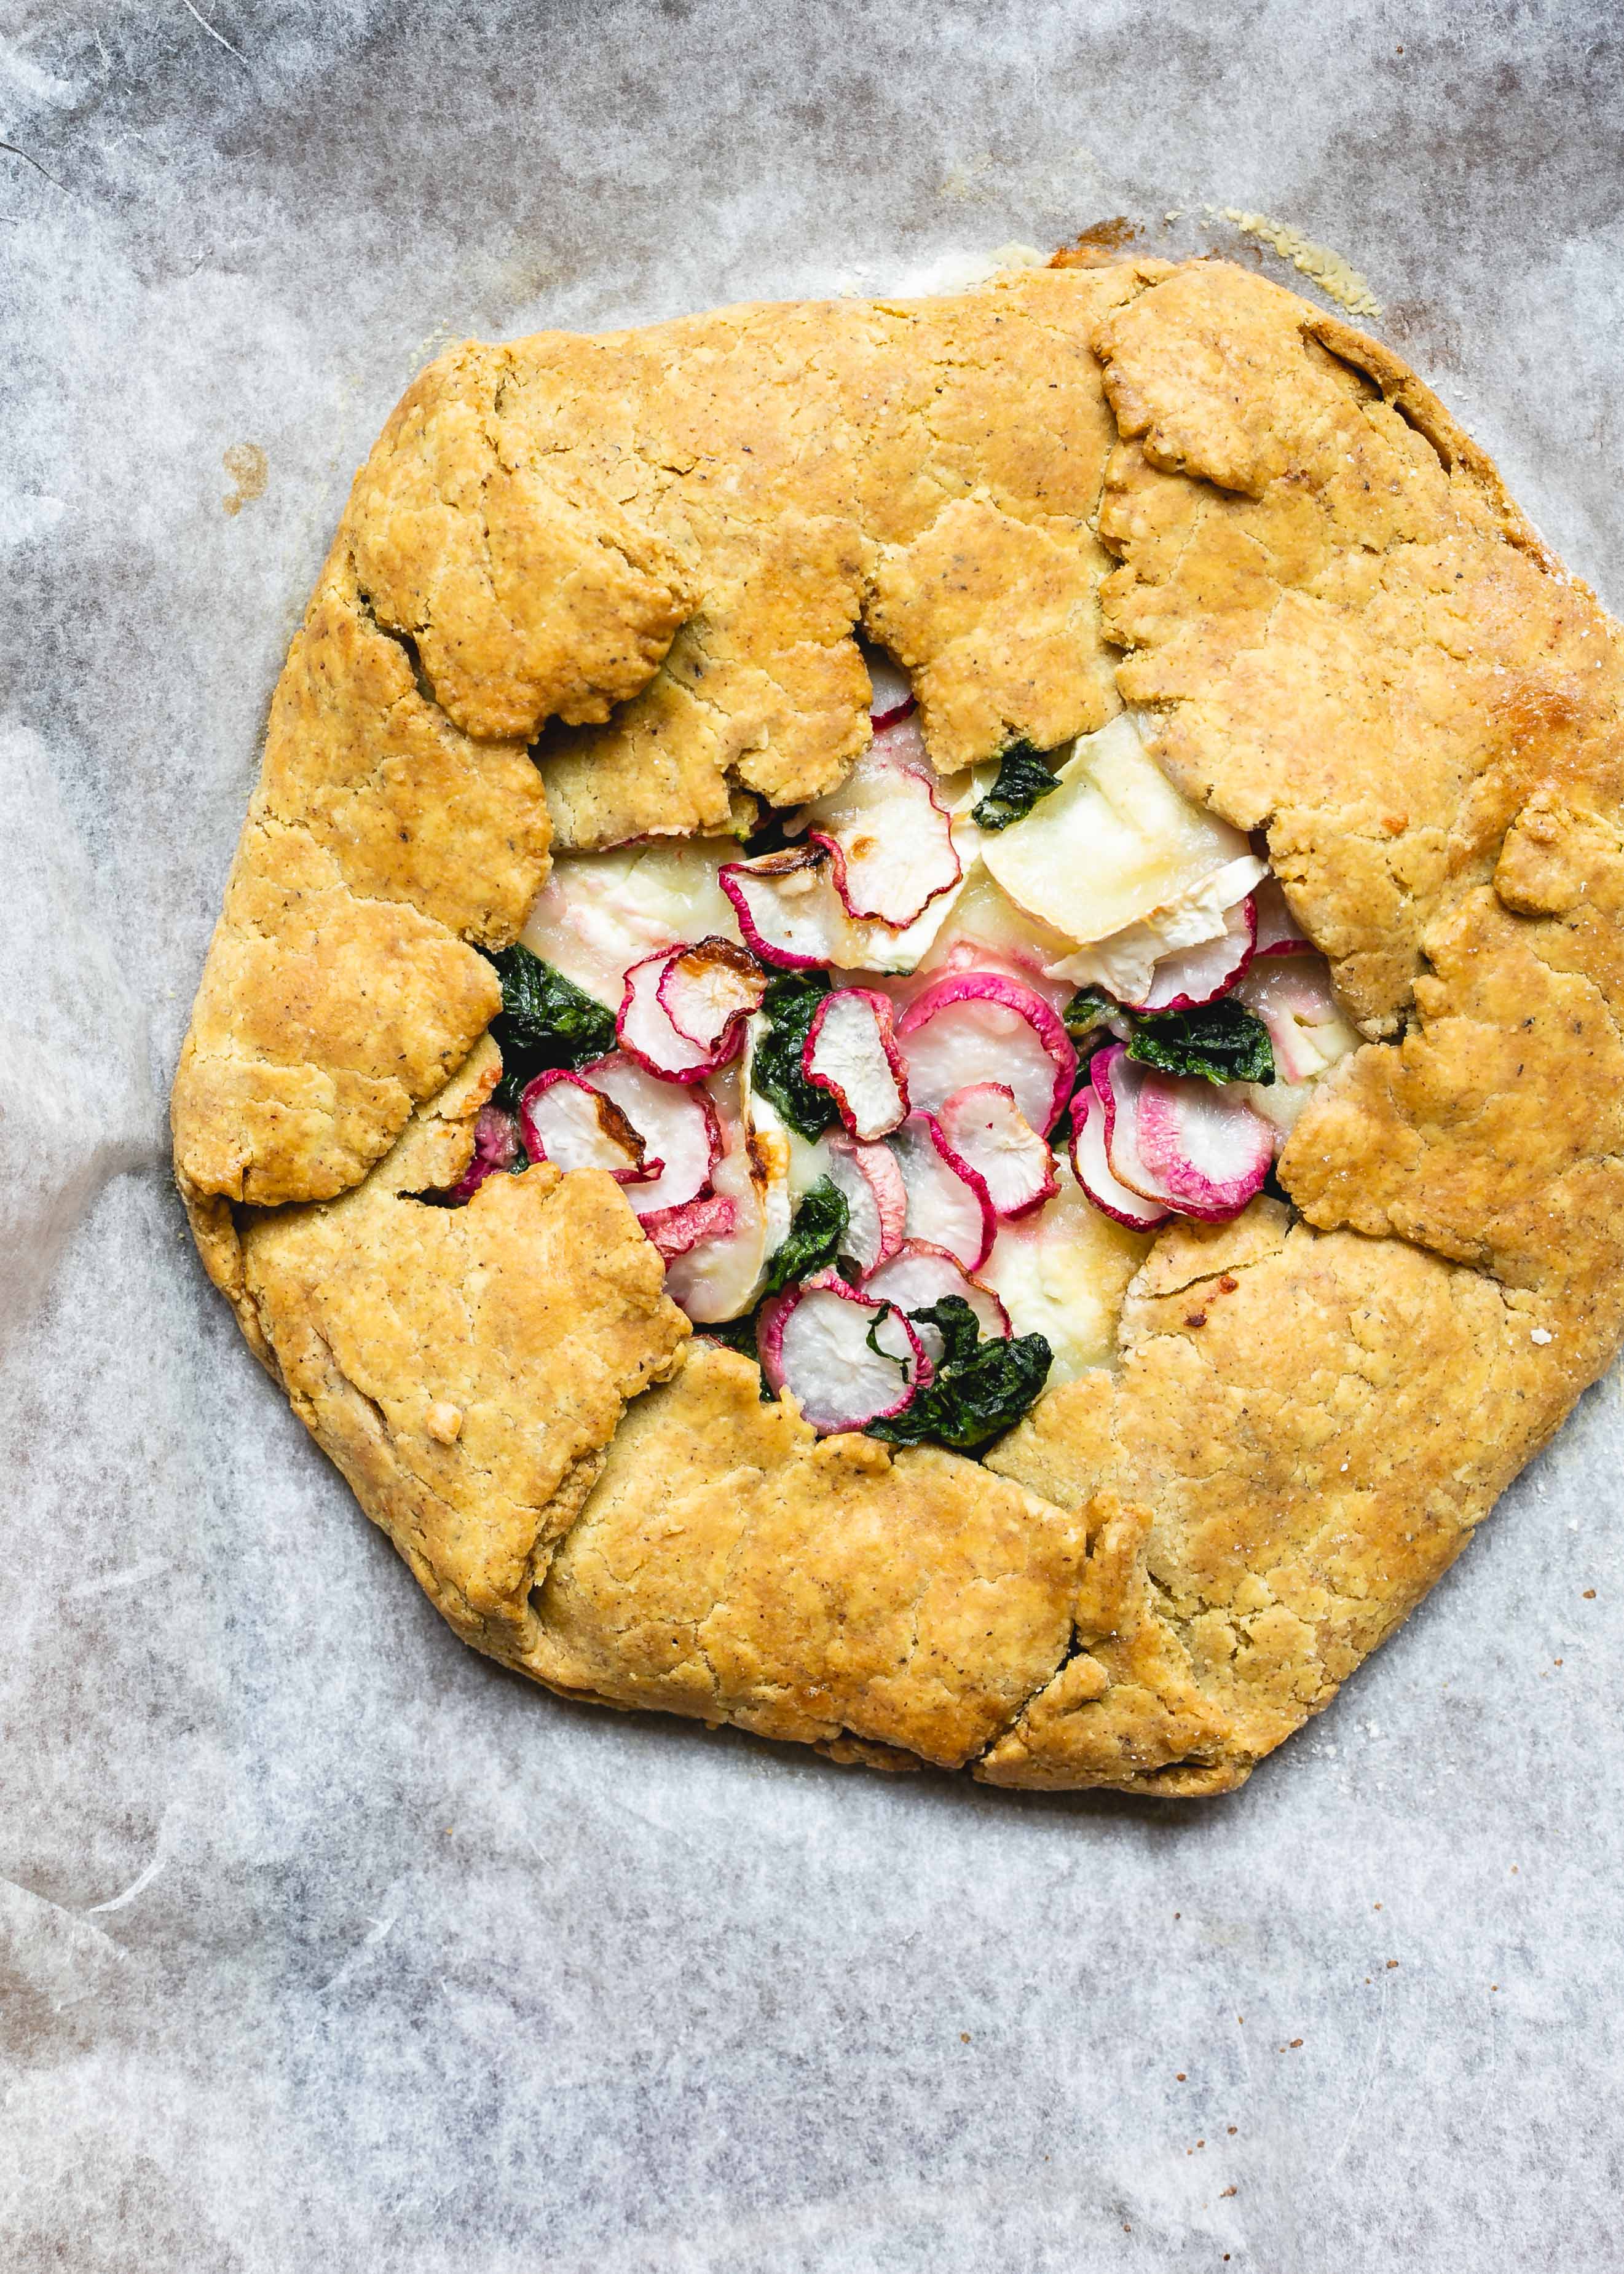 FODMAP friendly radish goats cheese spinach galette